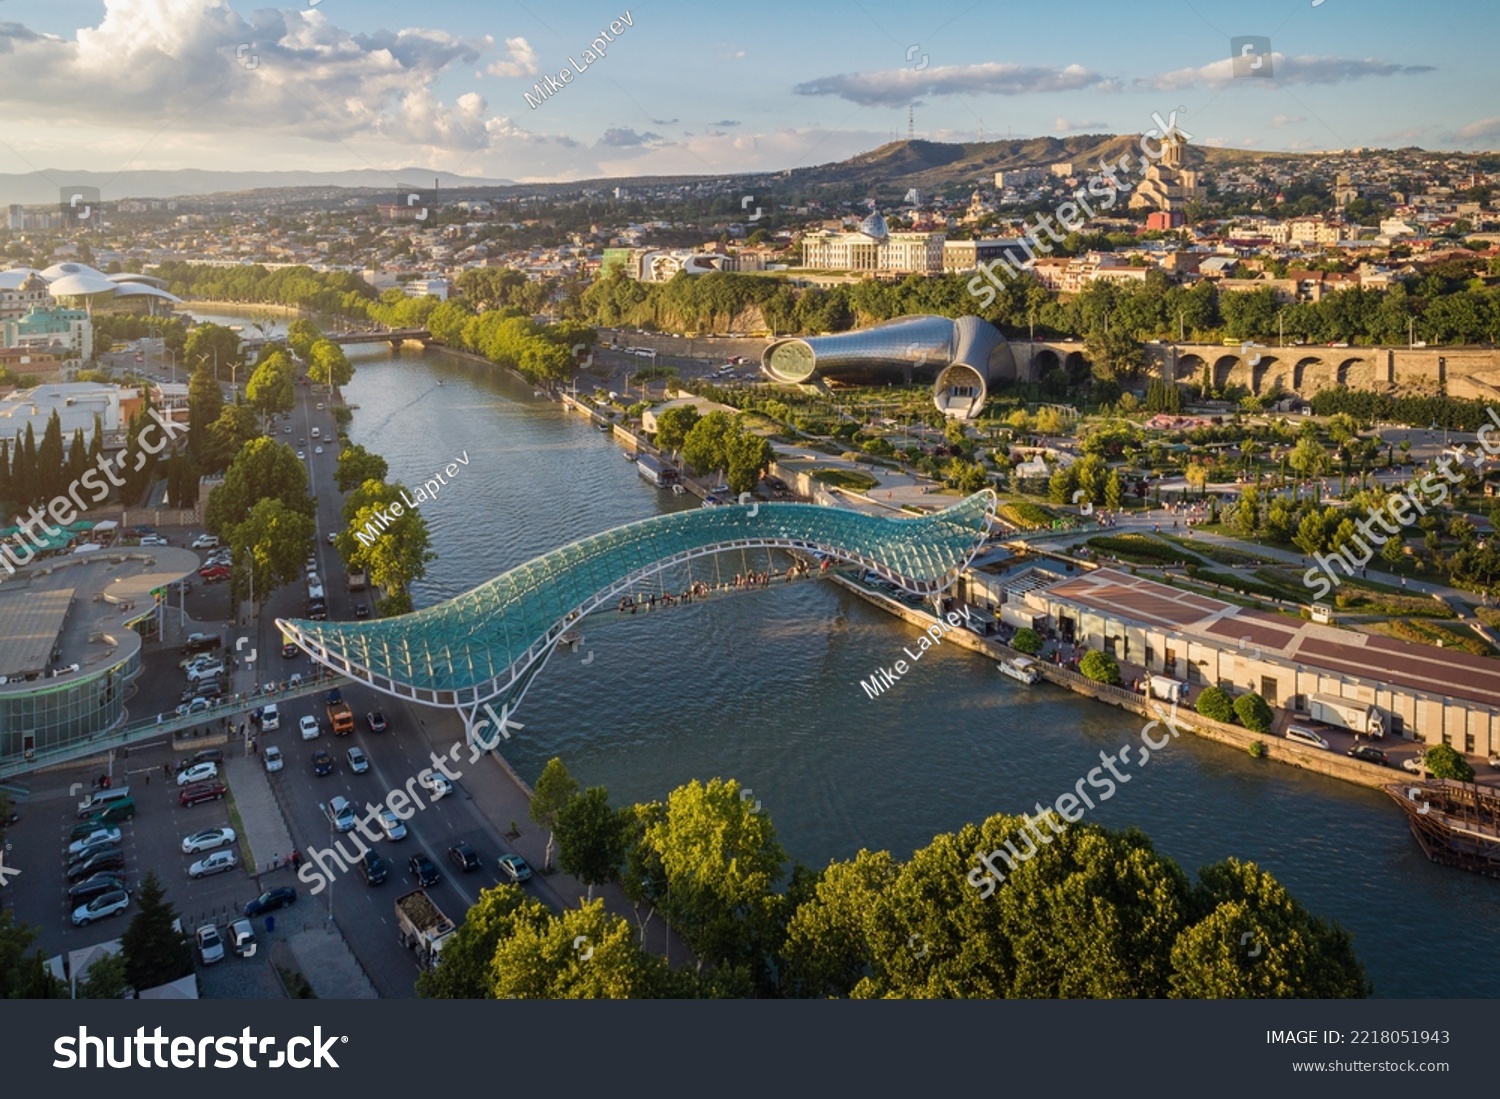 Panoramic aerial view of downtown Tbilisi, Georgia. In the foreground is the Peace Bridge over the Mtkvari River. #2218051943